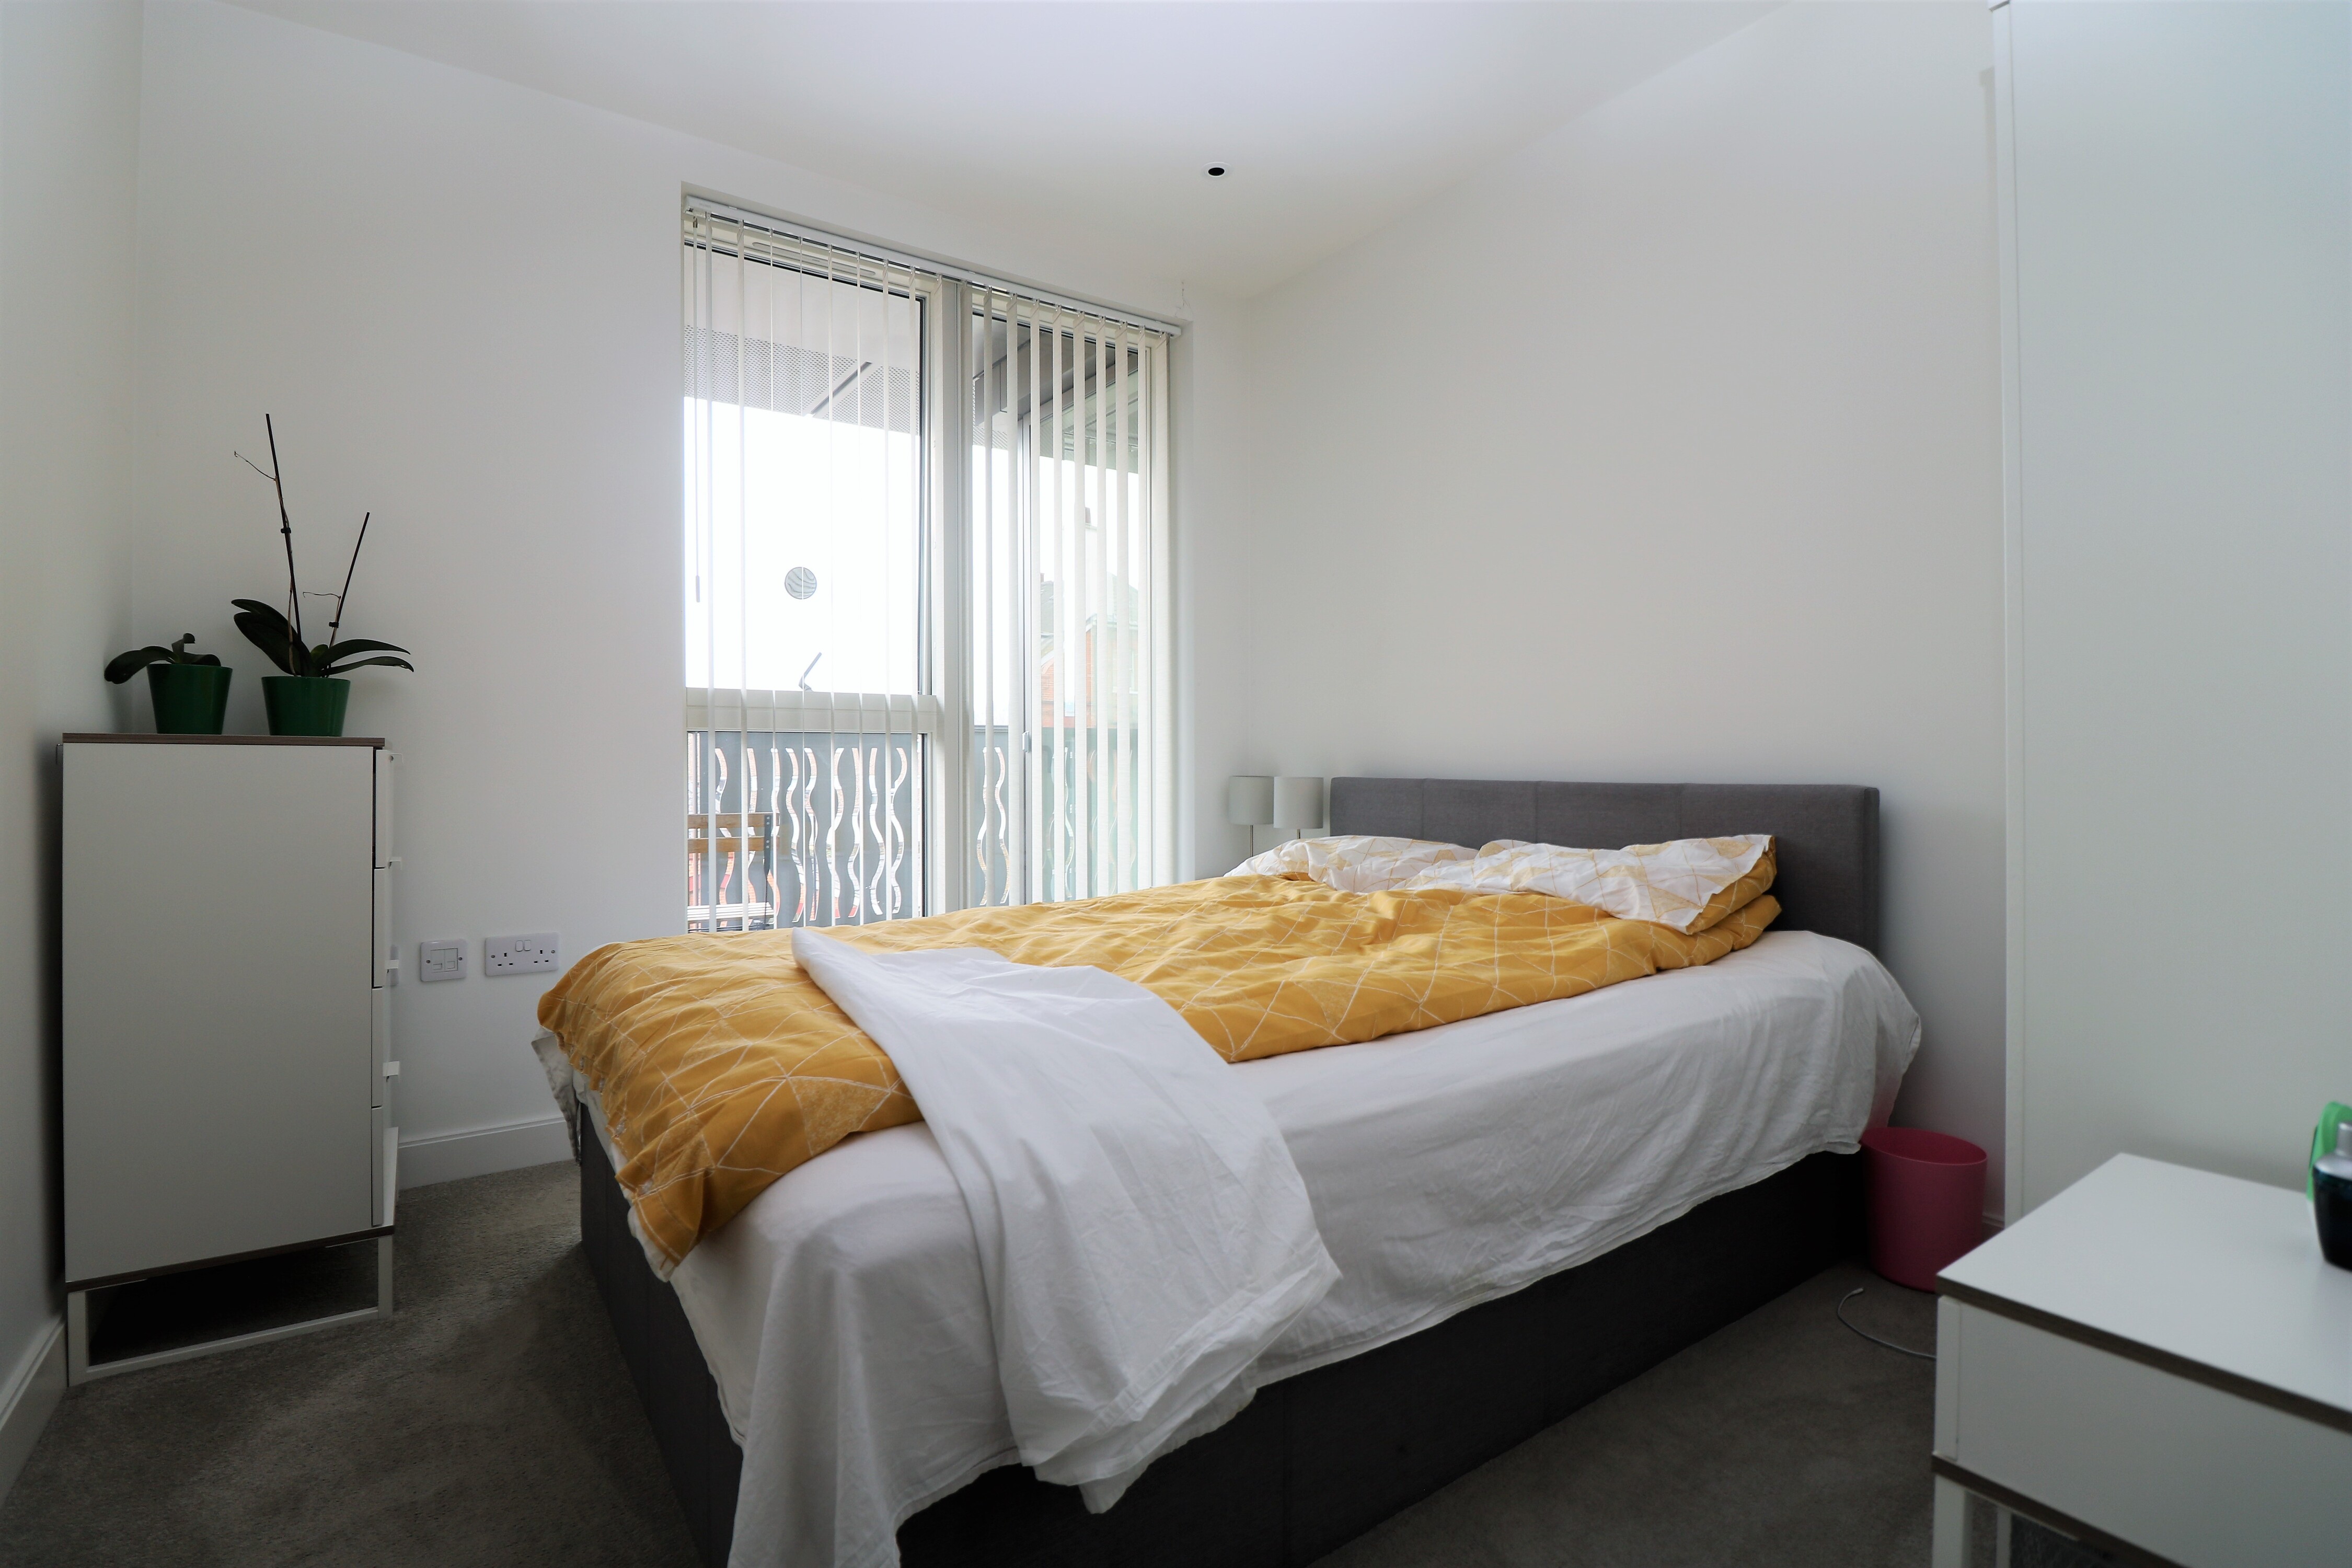 Stunning first floor two double bedroom flat with two stylish bathrooms, modern kitchen, concierge and gym in leafy, N8